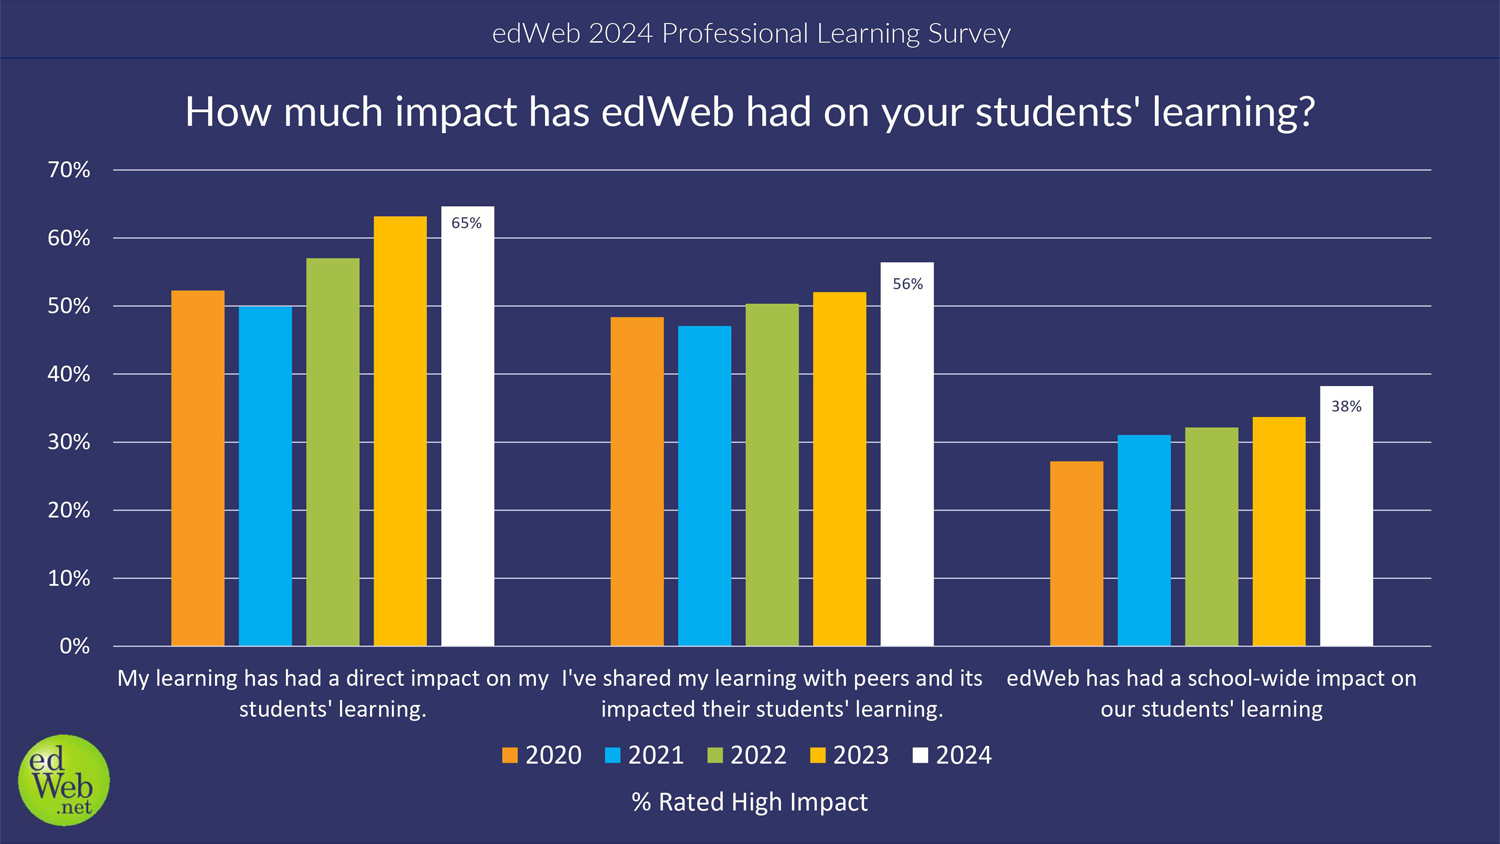 How much impact has edWeb had on your students' learning?